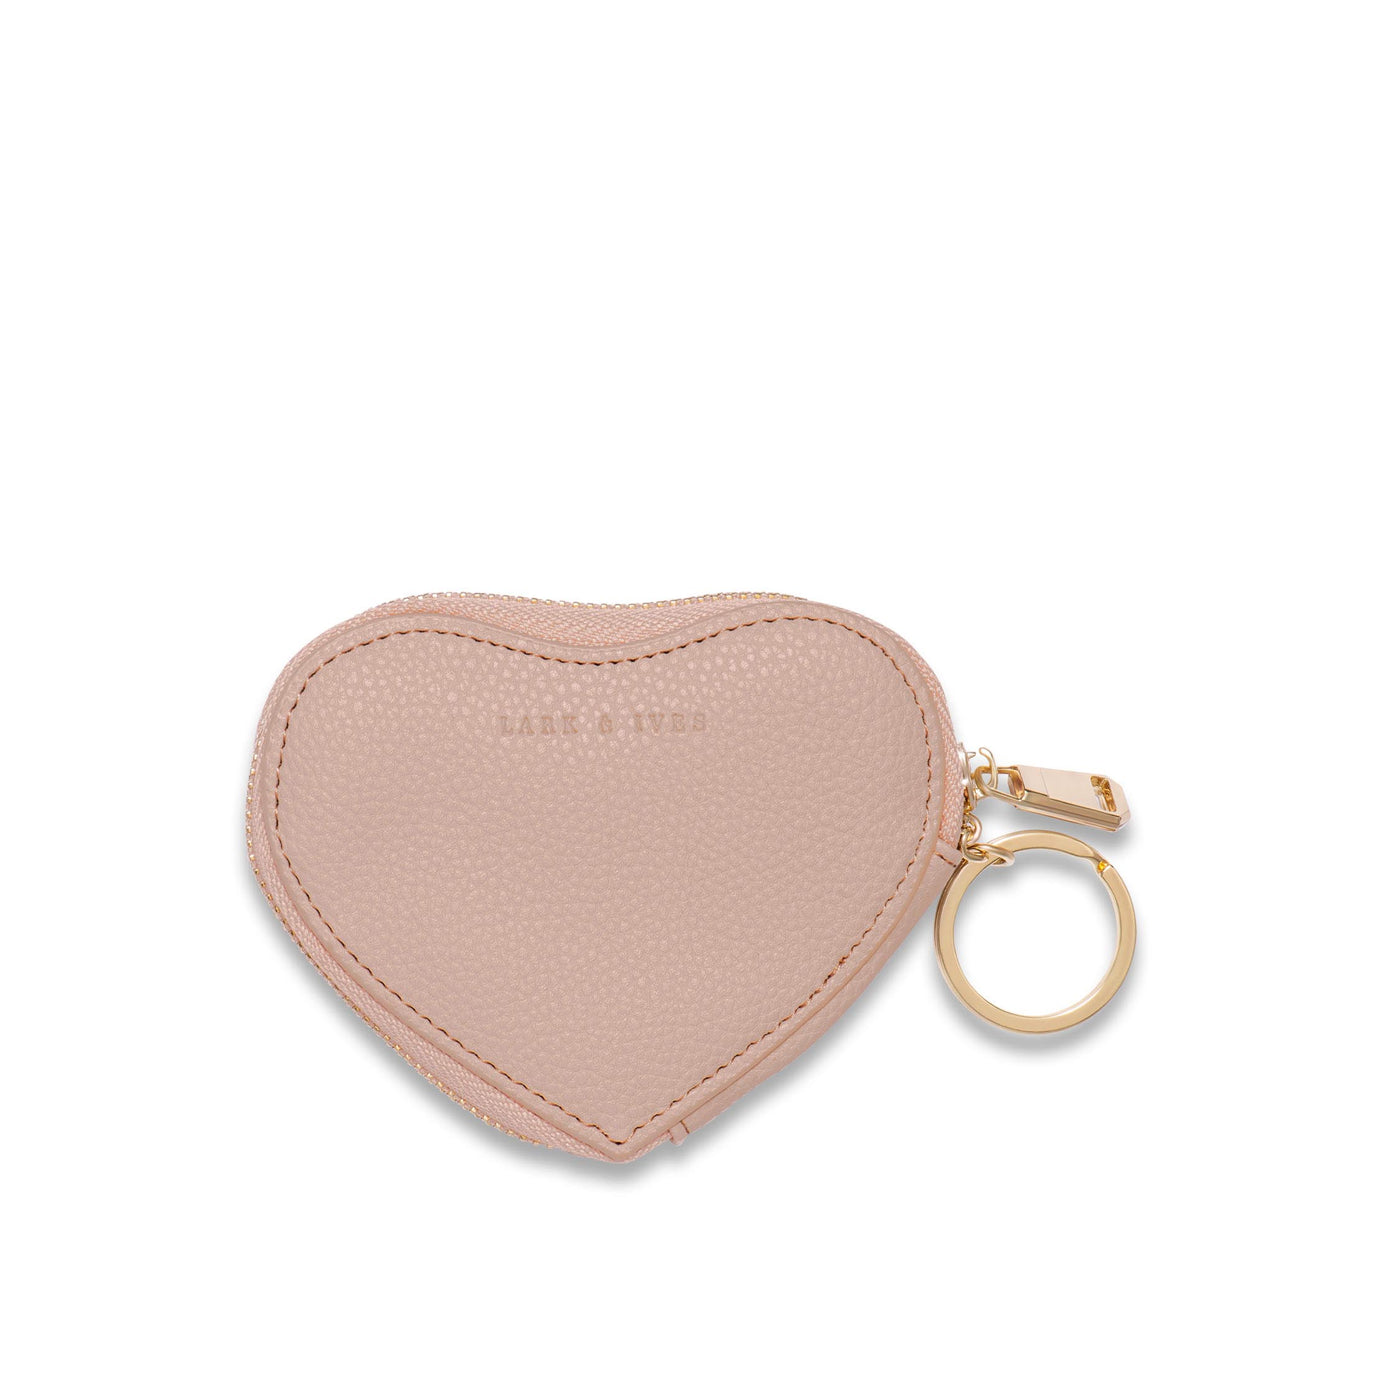 Saint Laurent Love Heart-shaped Leather Coin Purse in Black